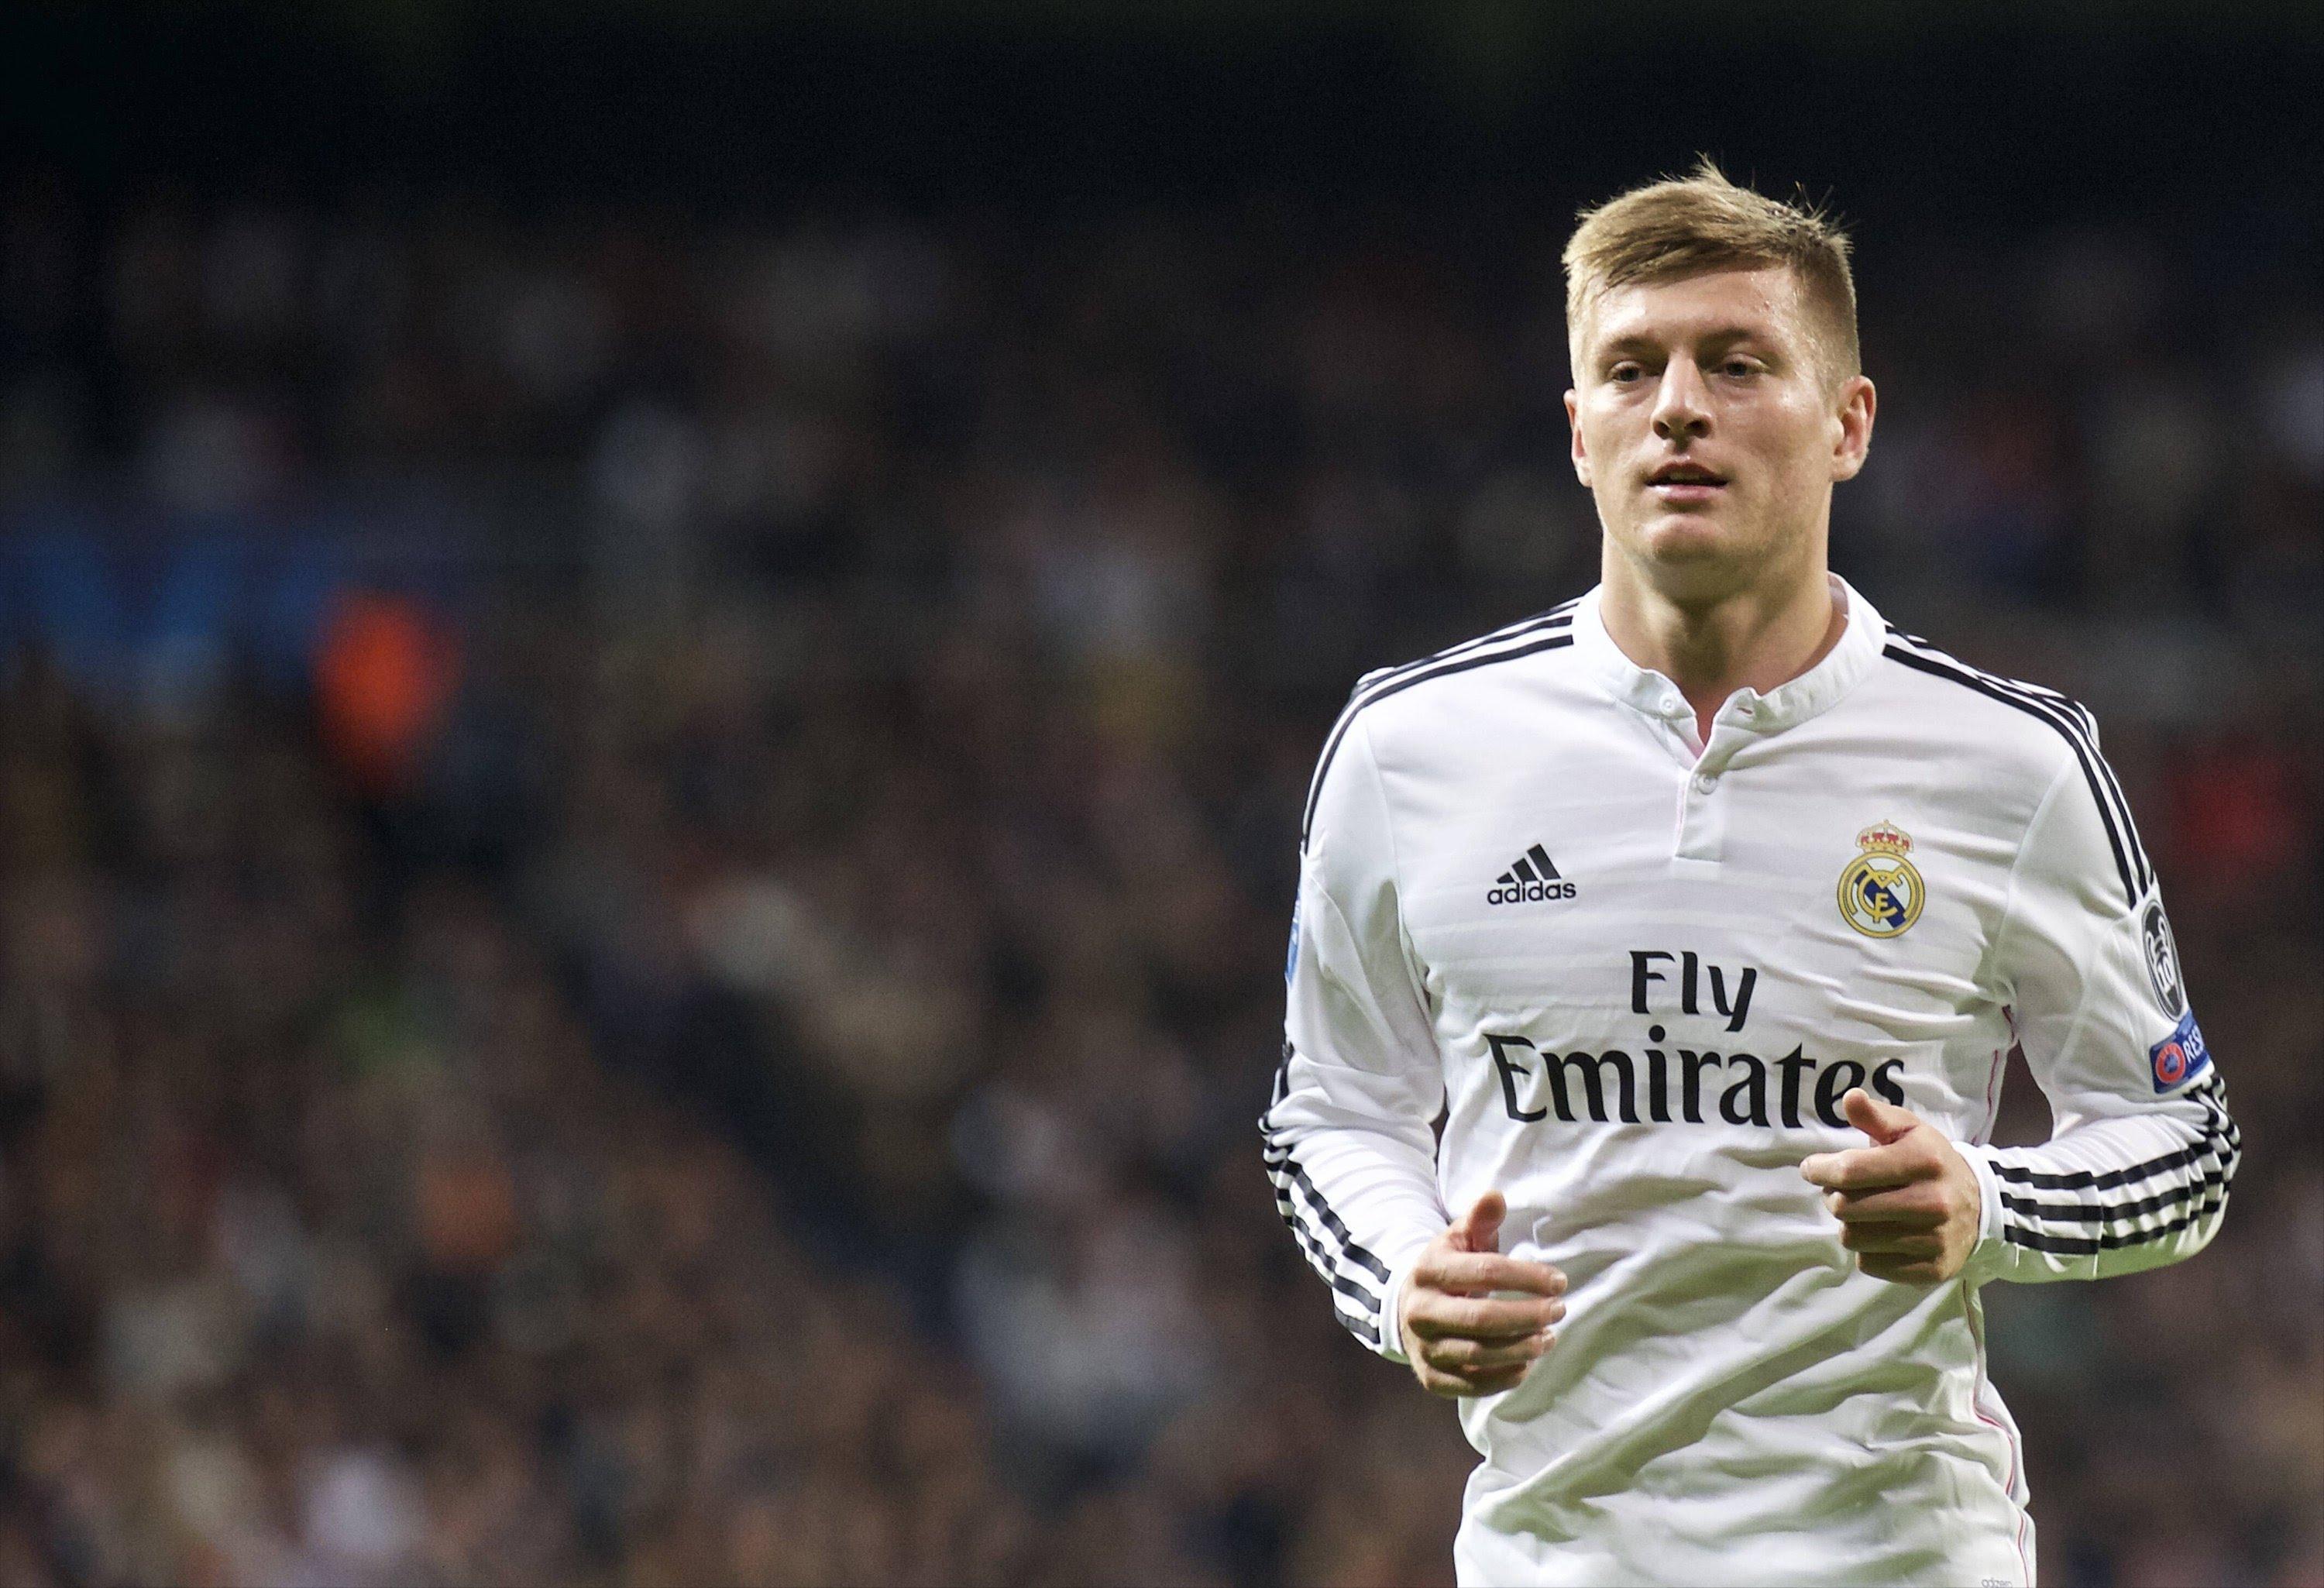 Toni Kroos Wallpaper High Resolution and Quality Download